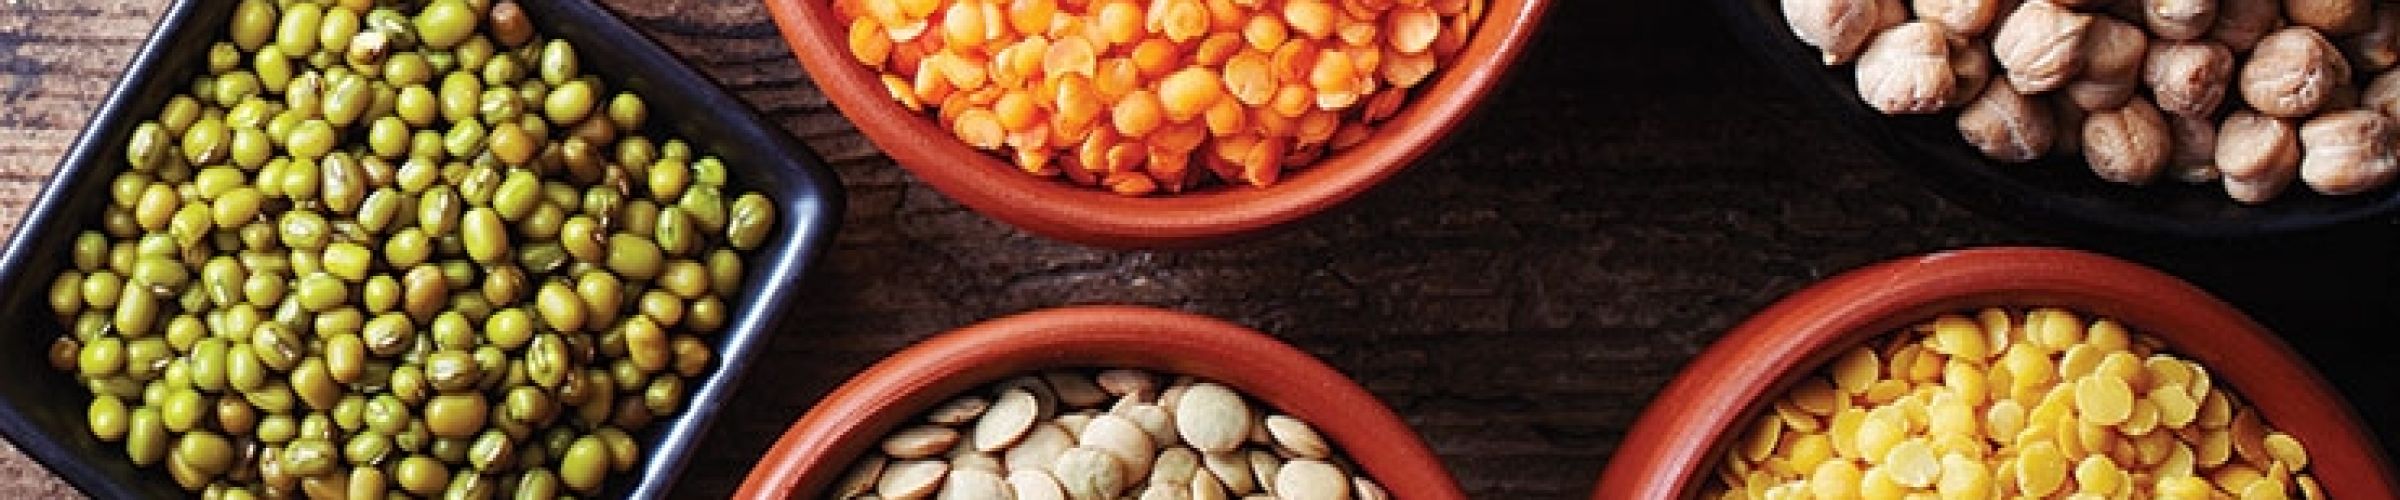 World Pulses Day- 10th February 2022